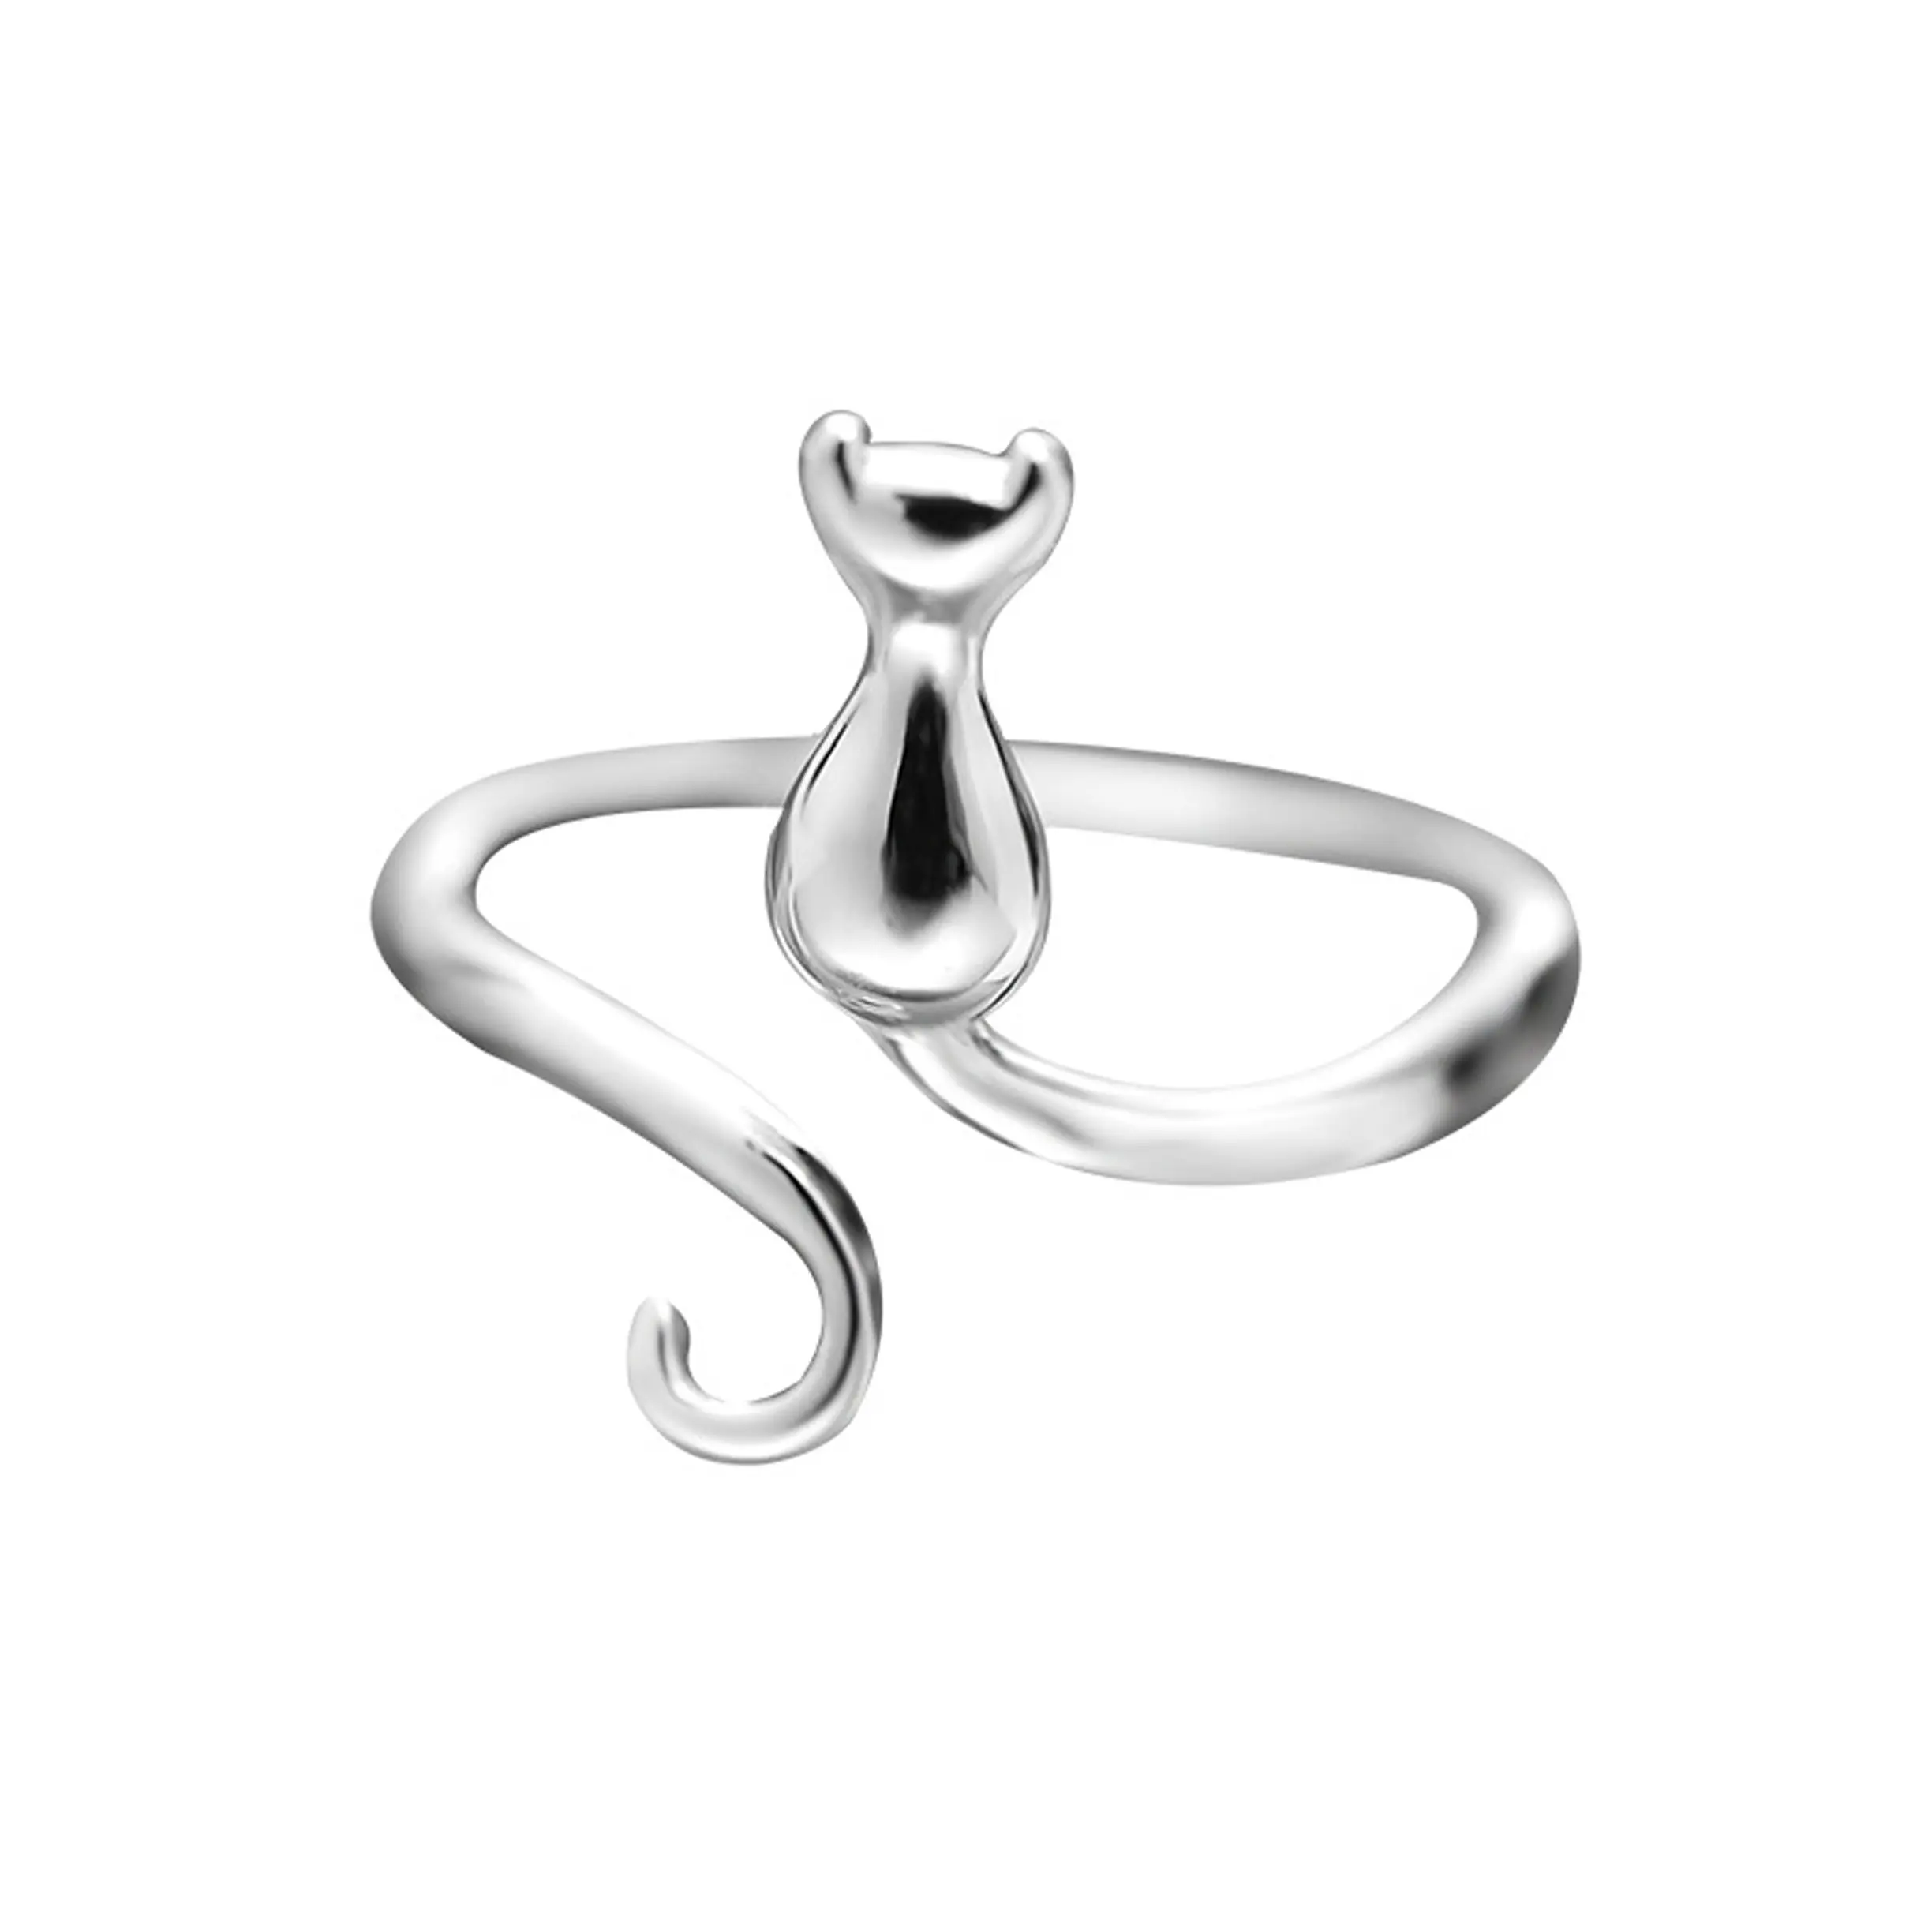 Silver plated adjustable ring for knitting or crochet cat ring knuckle assistant yarn guide crochet ring guide tension